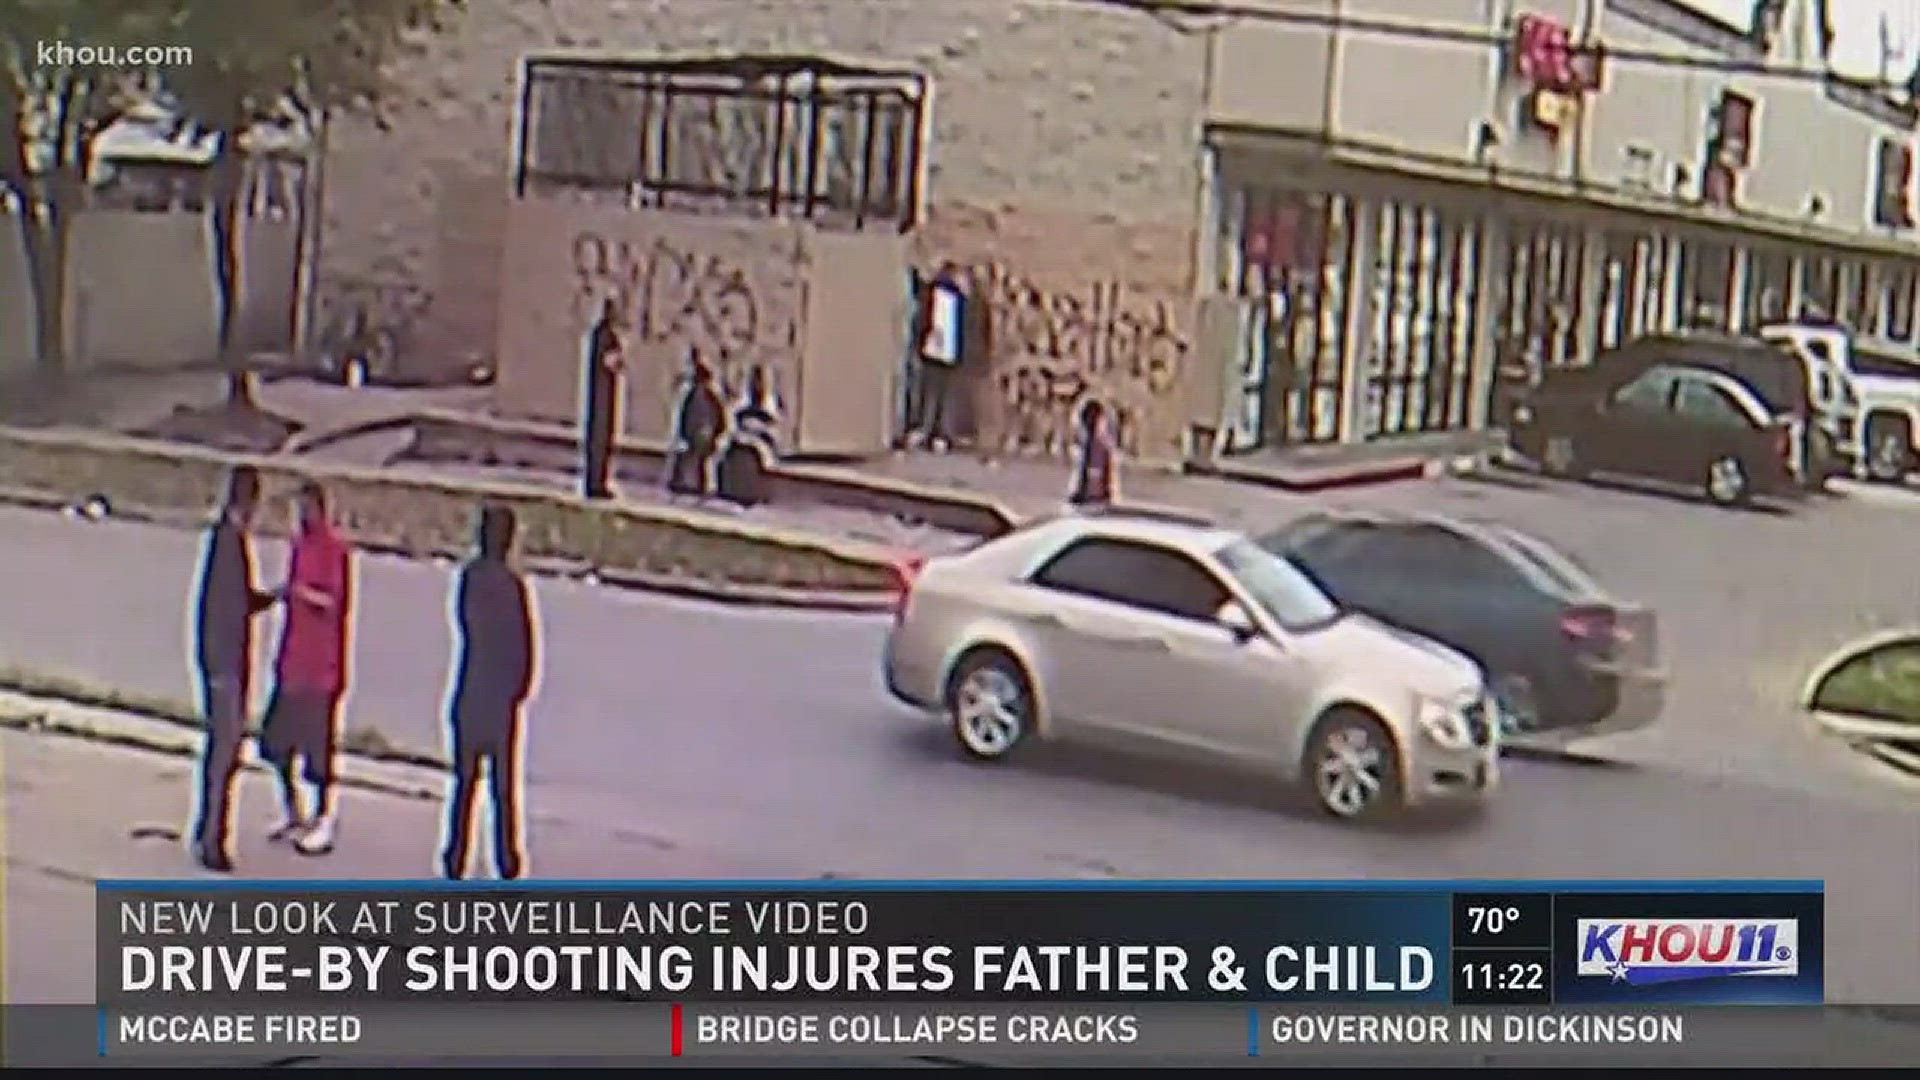 Houston Police have released the surveillance footage showing the drive by shooting that injured an innocent father and his 3 year old and left another bystander shot in the neck.